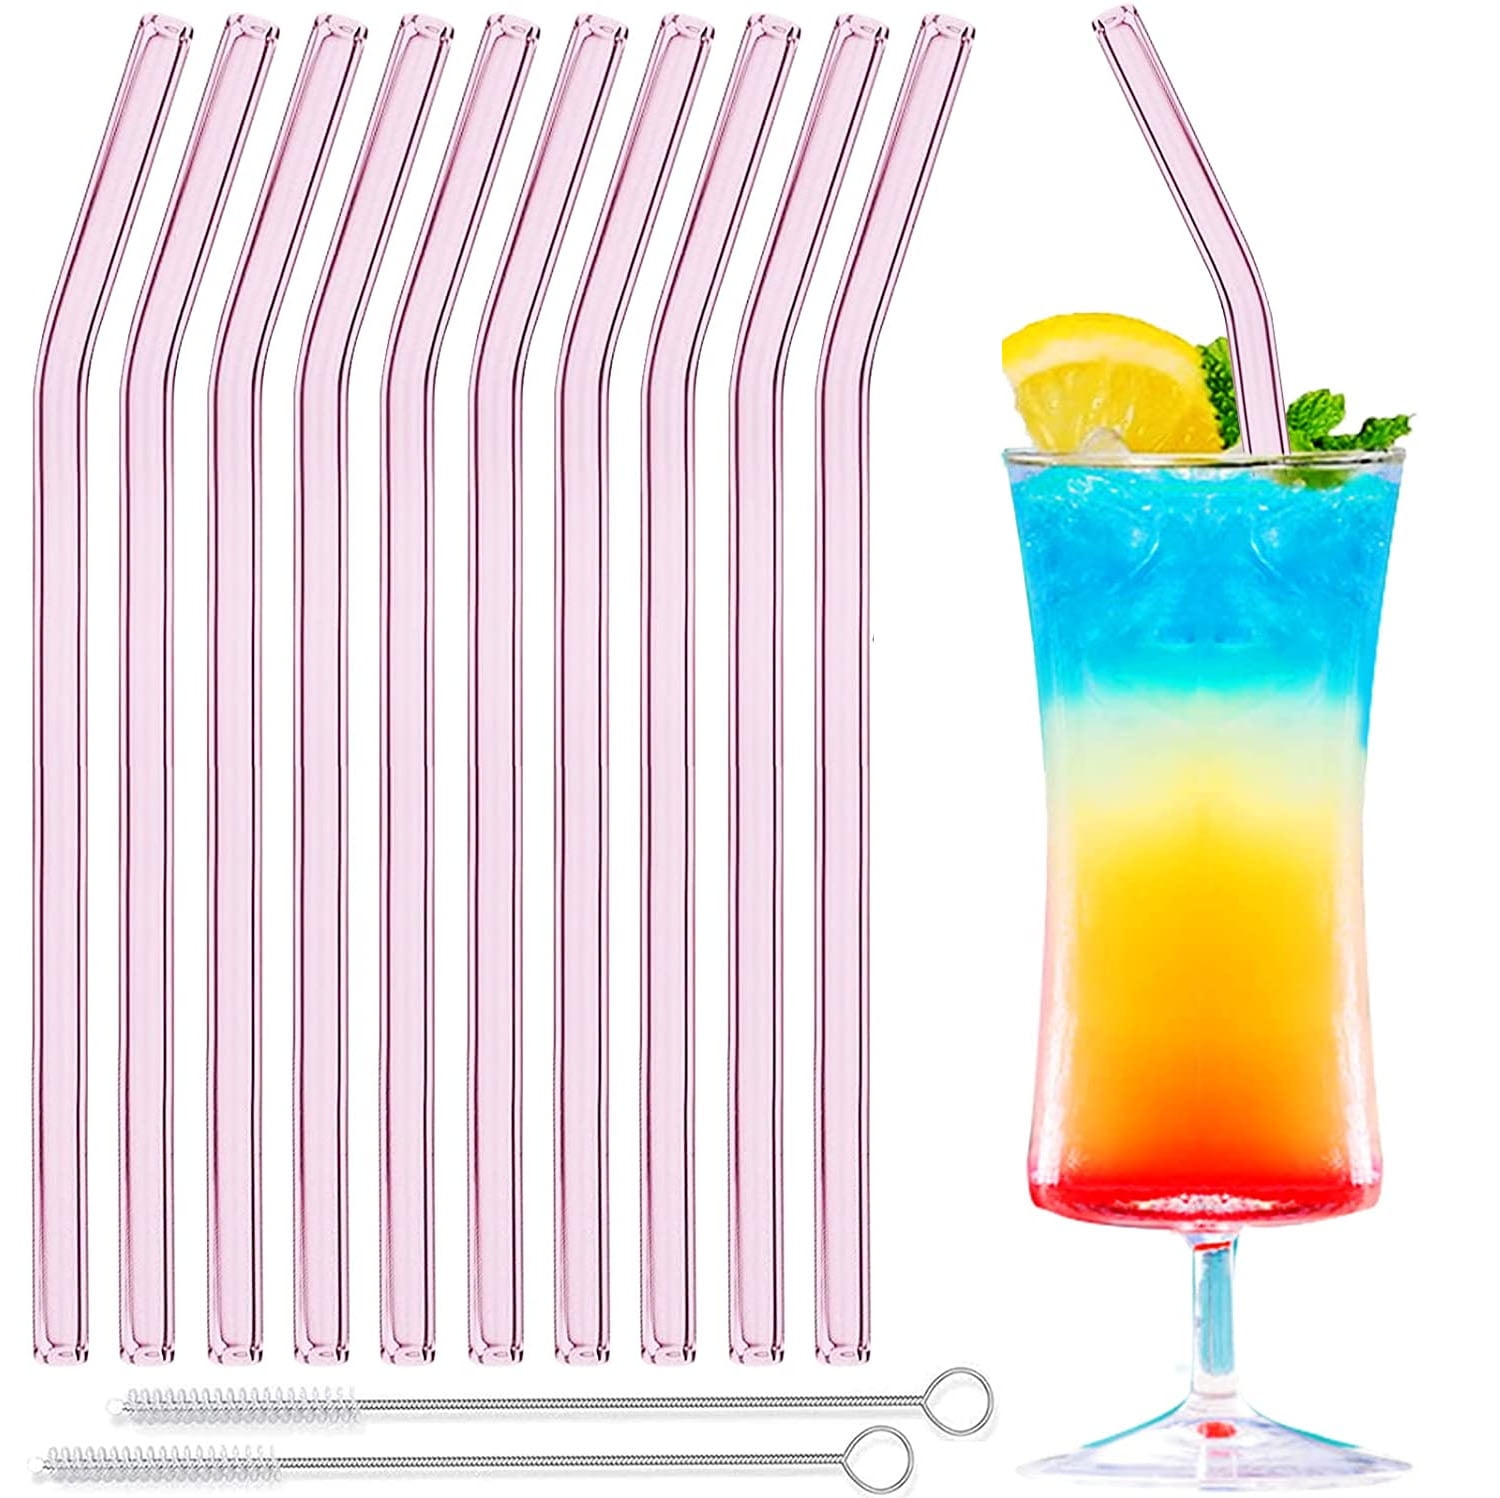 Reusable Bent Glass Drinking Straws,Set of 12 Bent Straws with 2 Cleaning Brushes,Shatter Resistant,Non-Toxic,Eco Friendly Reusable Straws